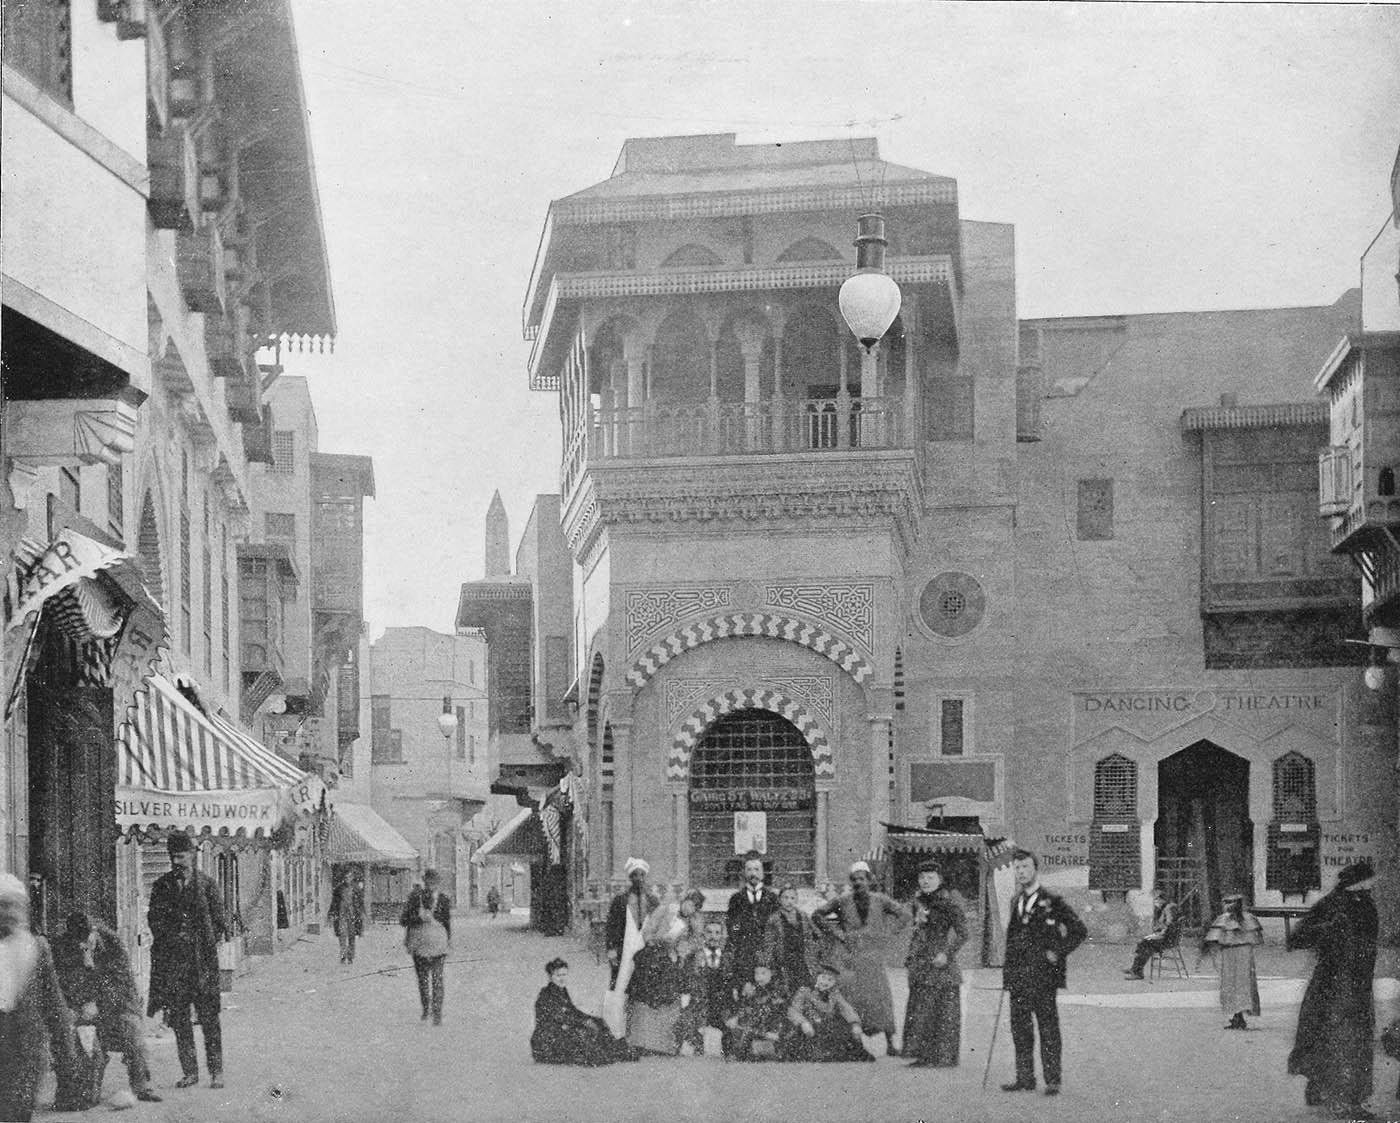 The "Streets of Cairo" on the Midway at the 1893 World's Columbian Exposition in Chicago